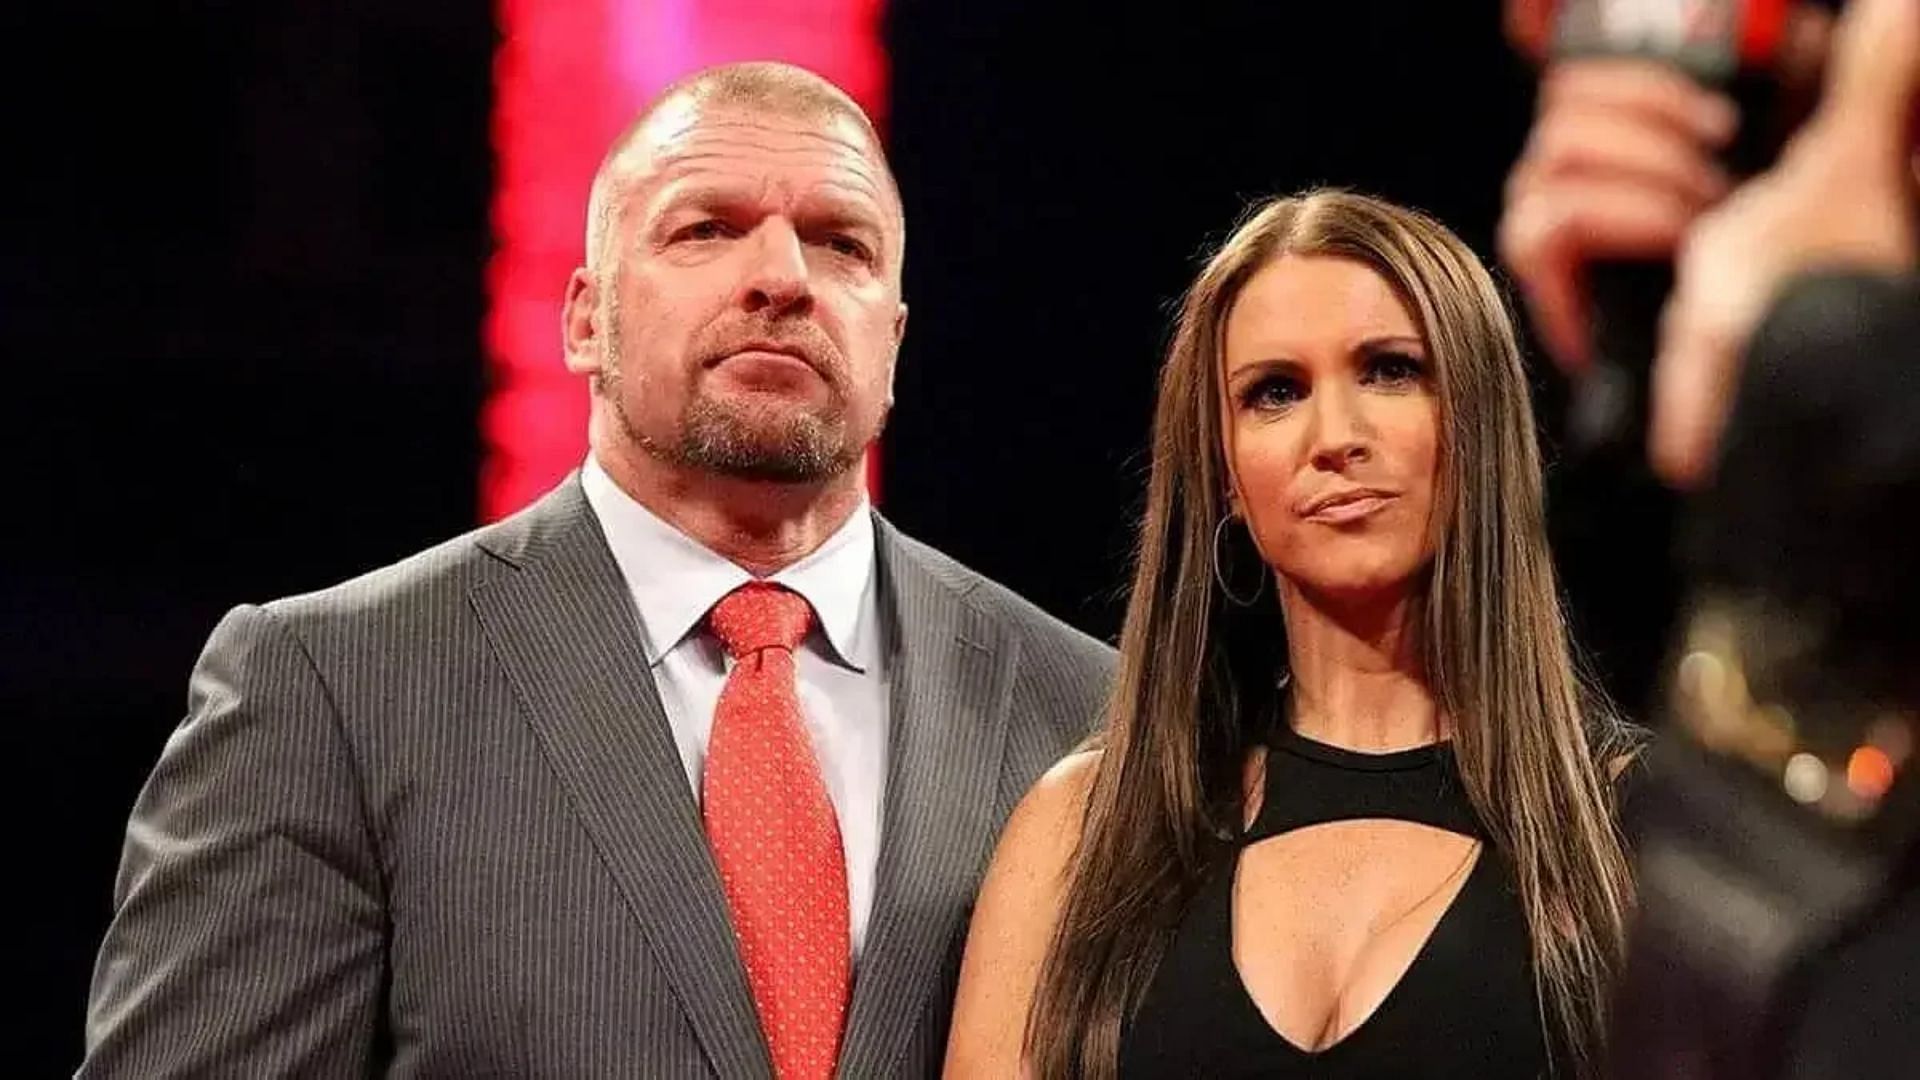 Triple H and Stephanie McMahon are two of WWE